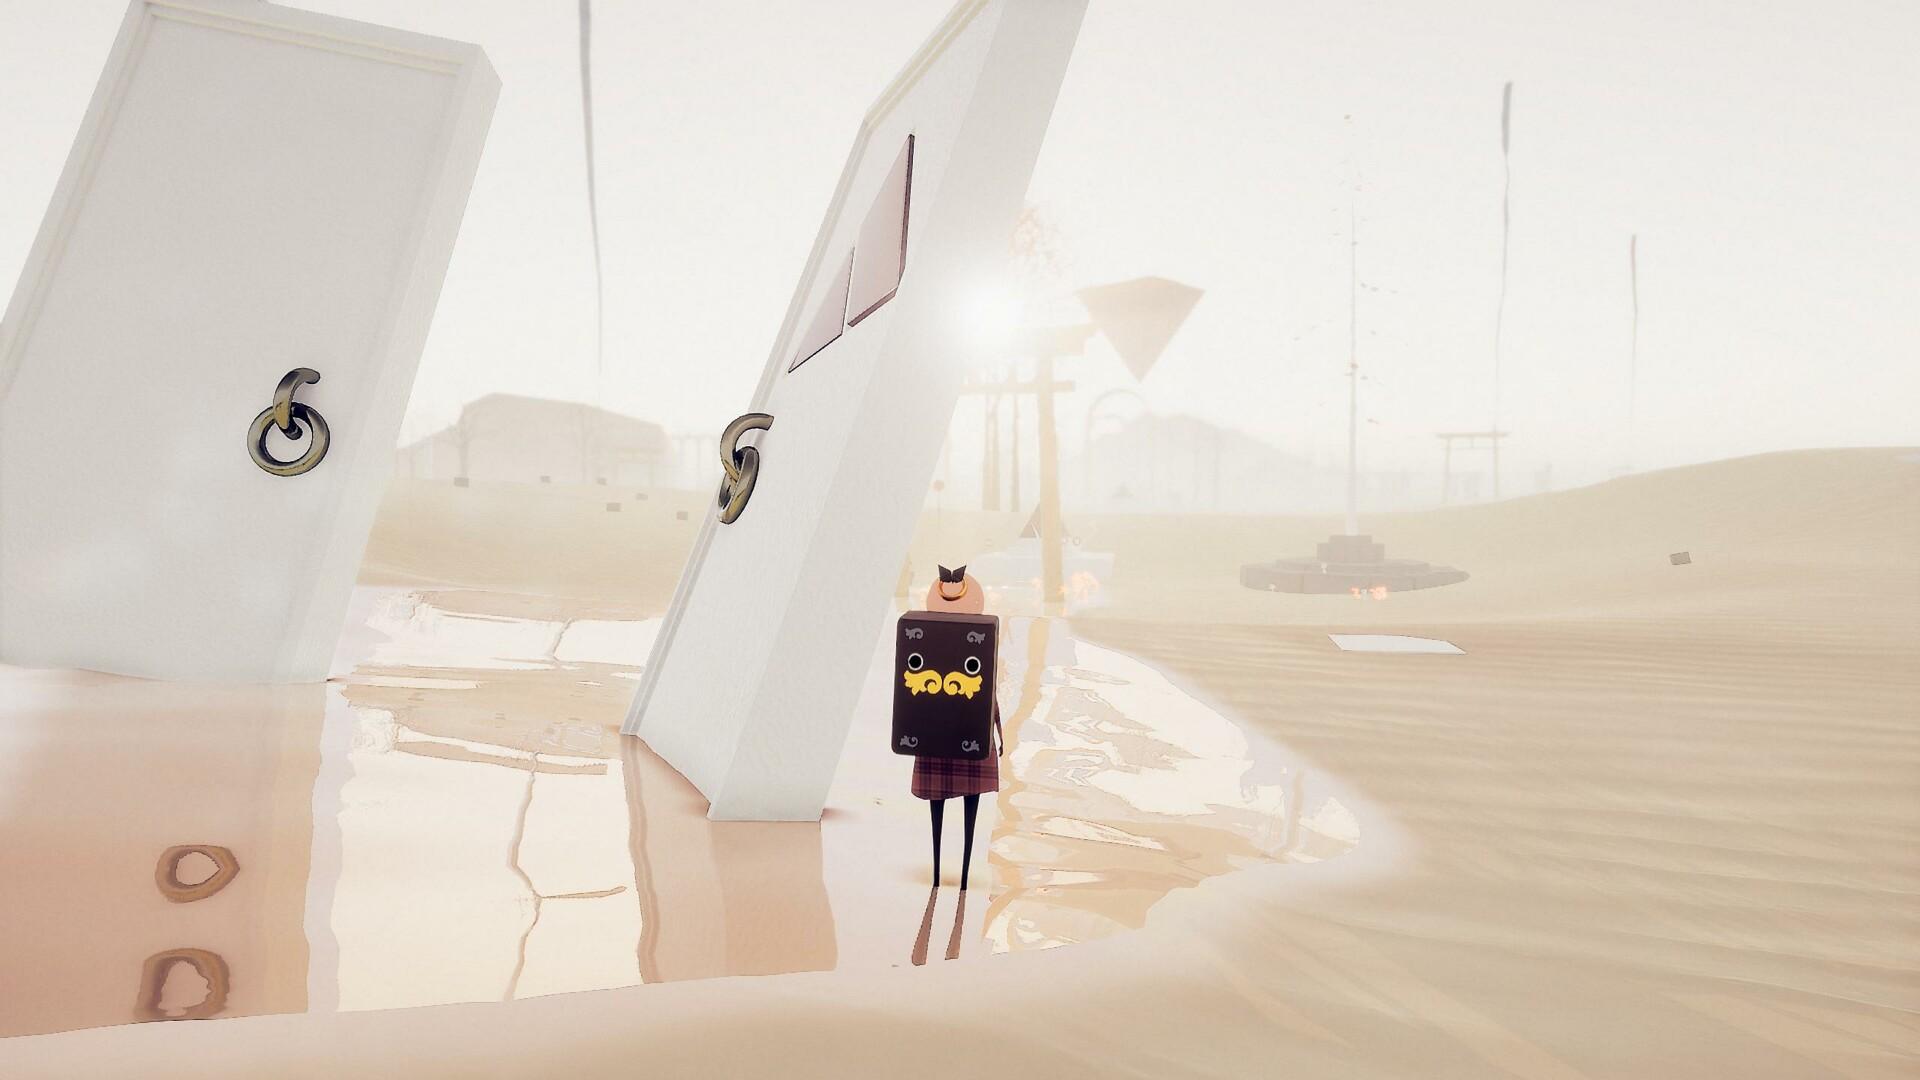 torii - a character stands in a surreal field filled with white obelisks